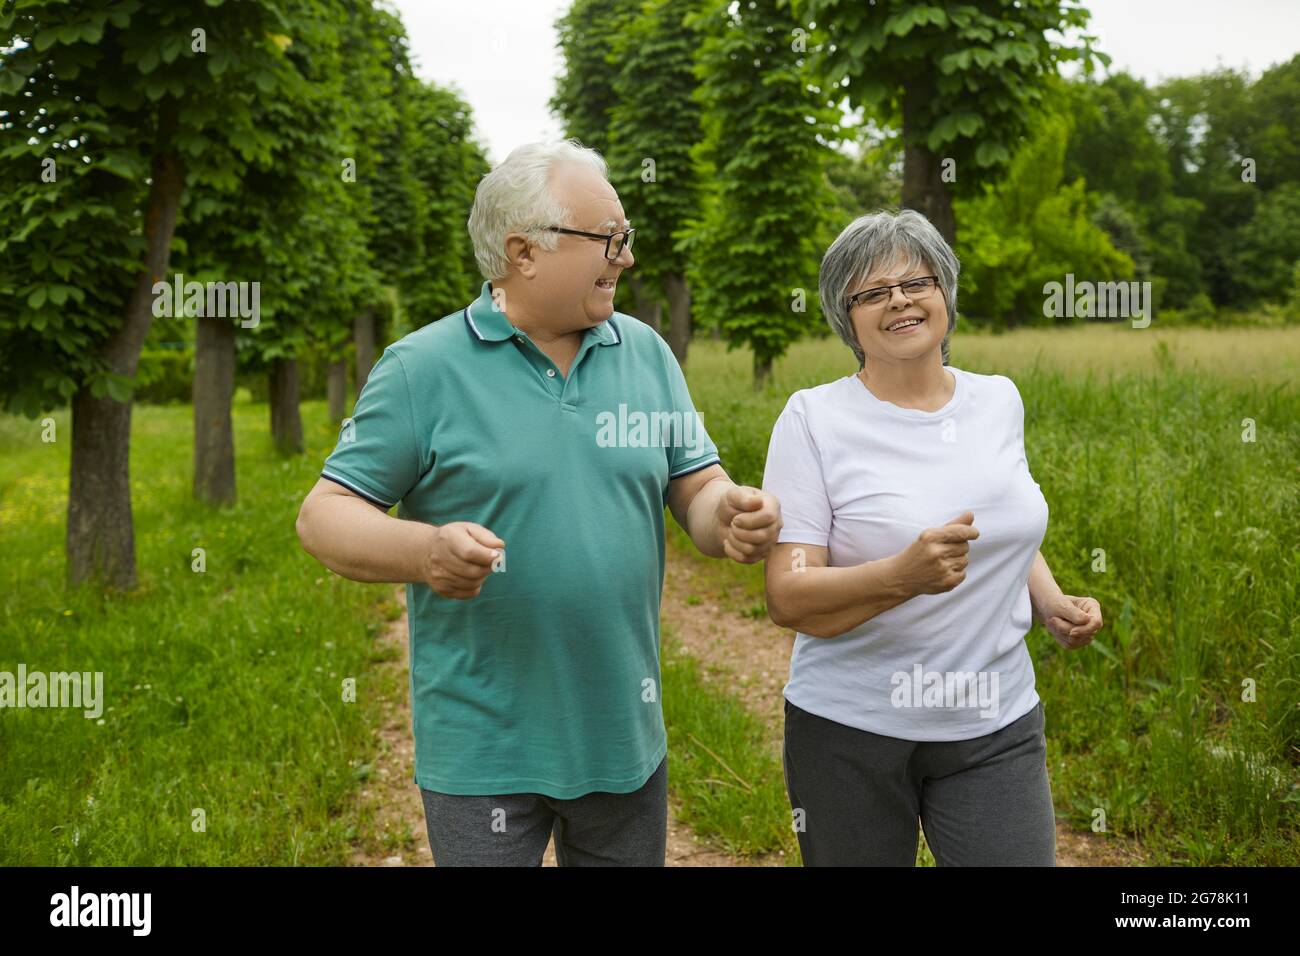 Happy active elderly couple on a summer day jogging outdoors in a park or forest. Stock Photo